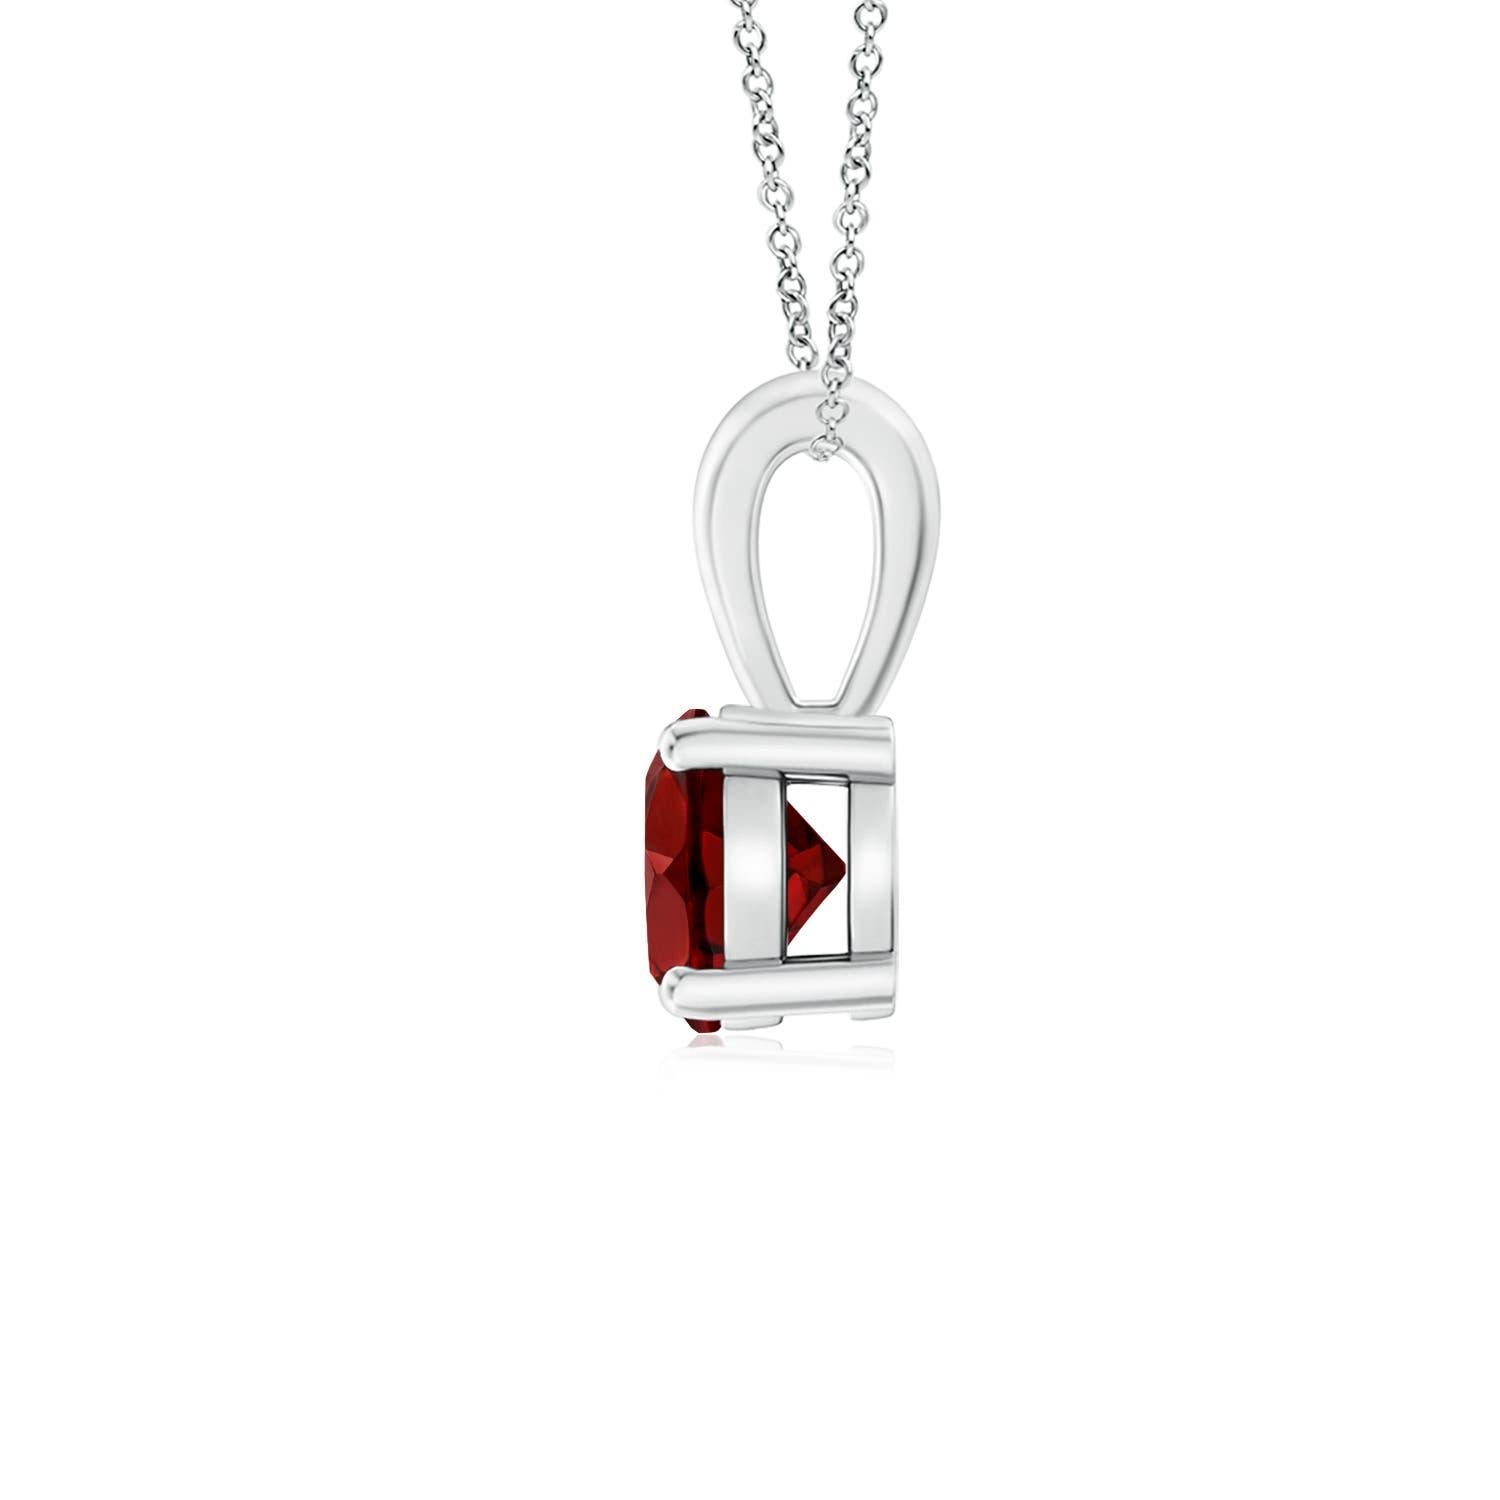 Linked to a single bale is a sparkling garnet secured in a four prong setting. This solitaire garnet pendant has a simple design and draws all the attention towards its deep red hue. It is crafted in platinum.
Garnet is the Birthstone for January